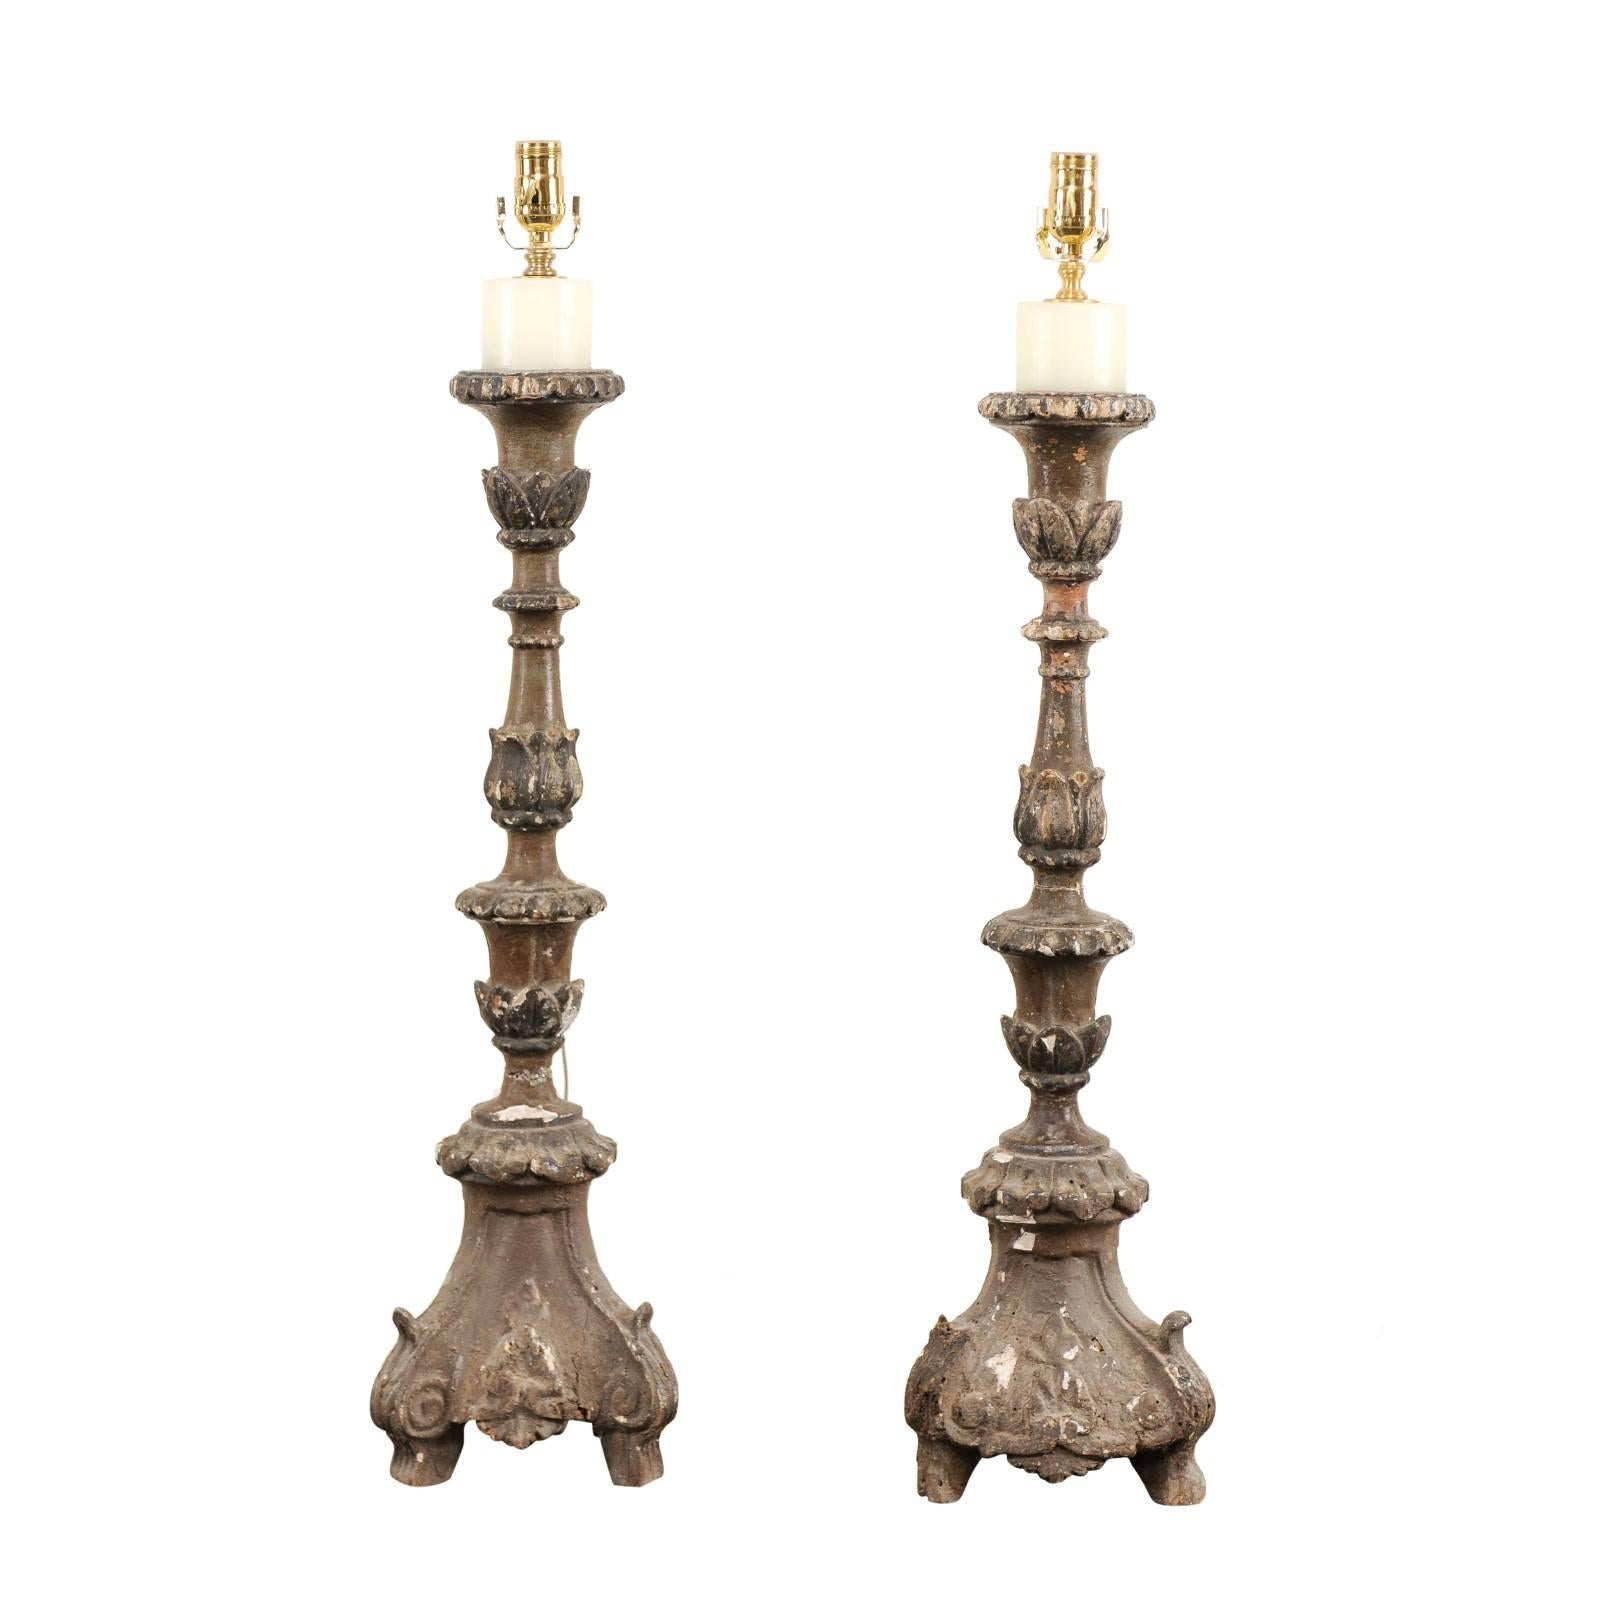 Pair of Italian 18th Century Wood Altar Sticks, Made Tall and Thin Table Lamps